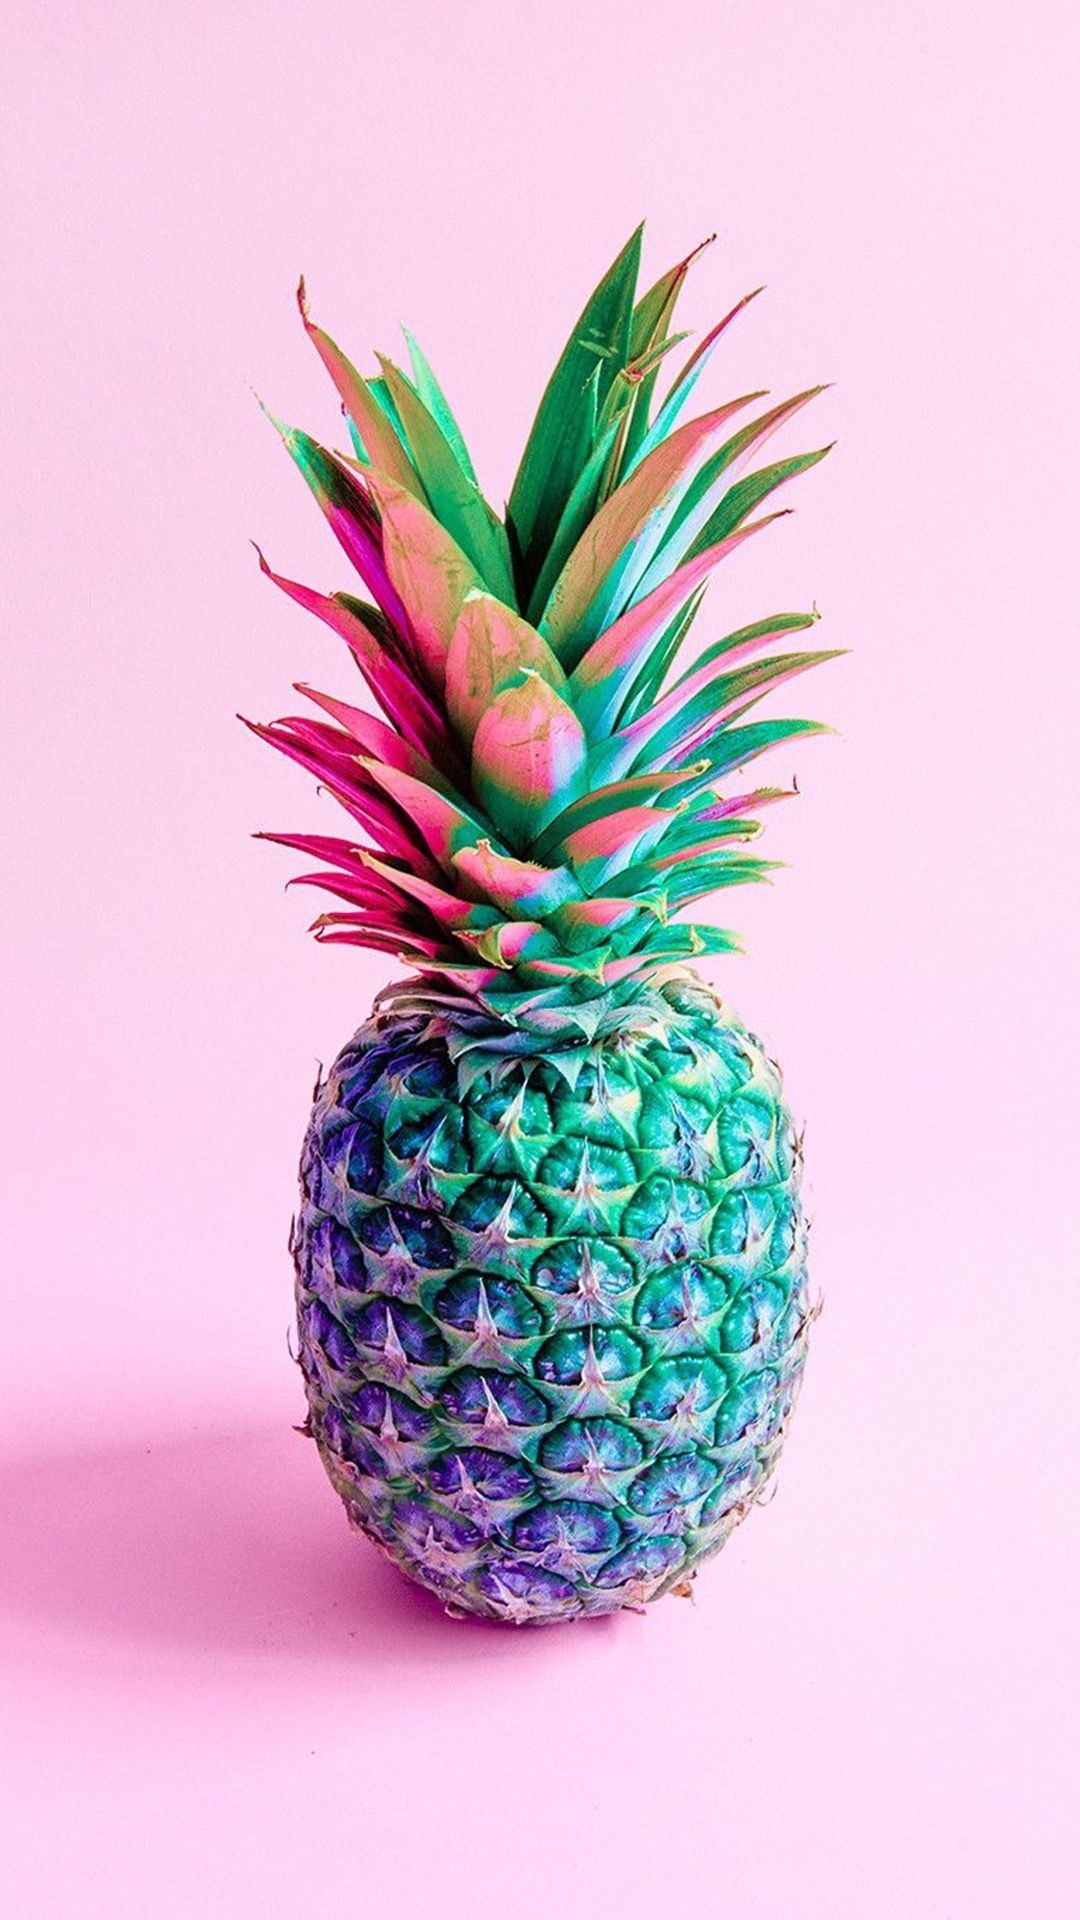 Pineapple: Pineapples grow on the central stalk of a large plant with swordlike leaves. 1080x1920 Full HD Wallpaper.